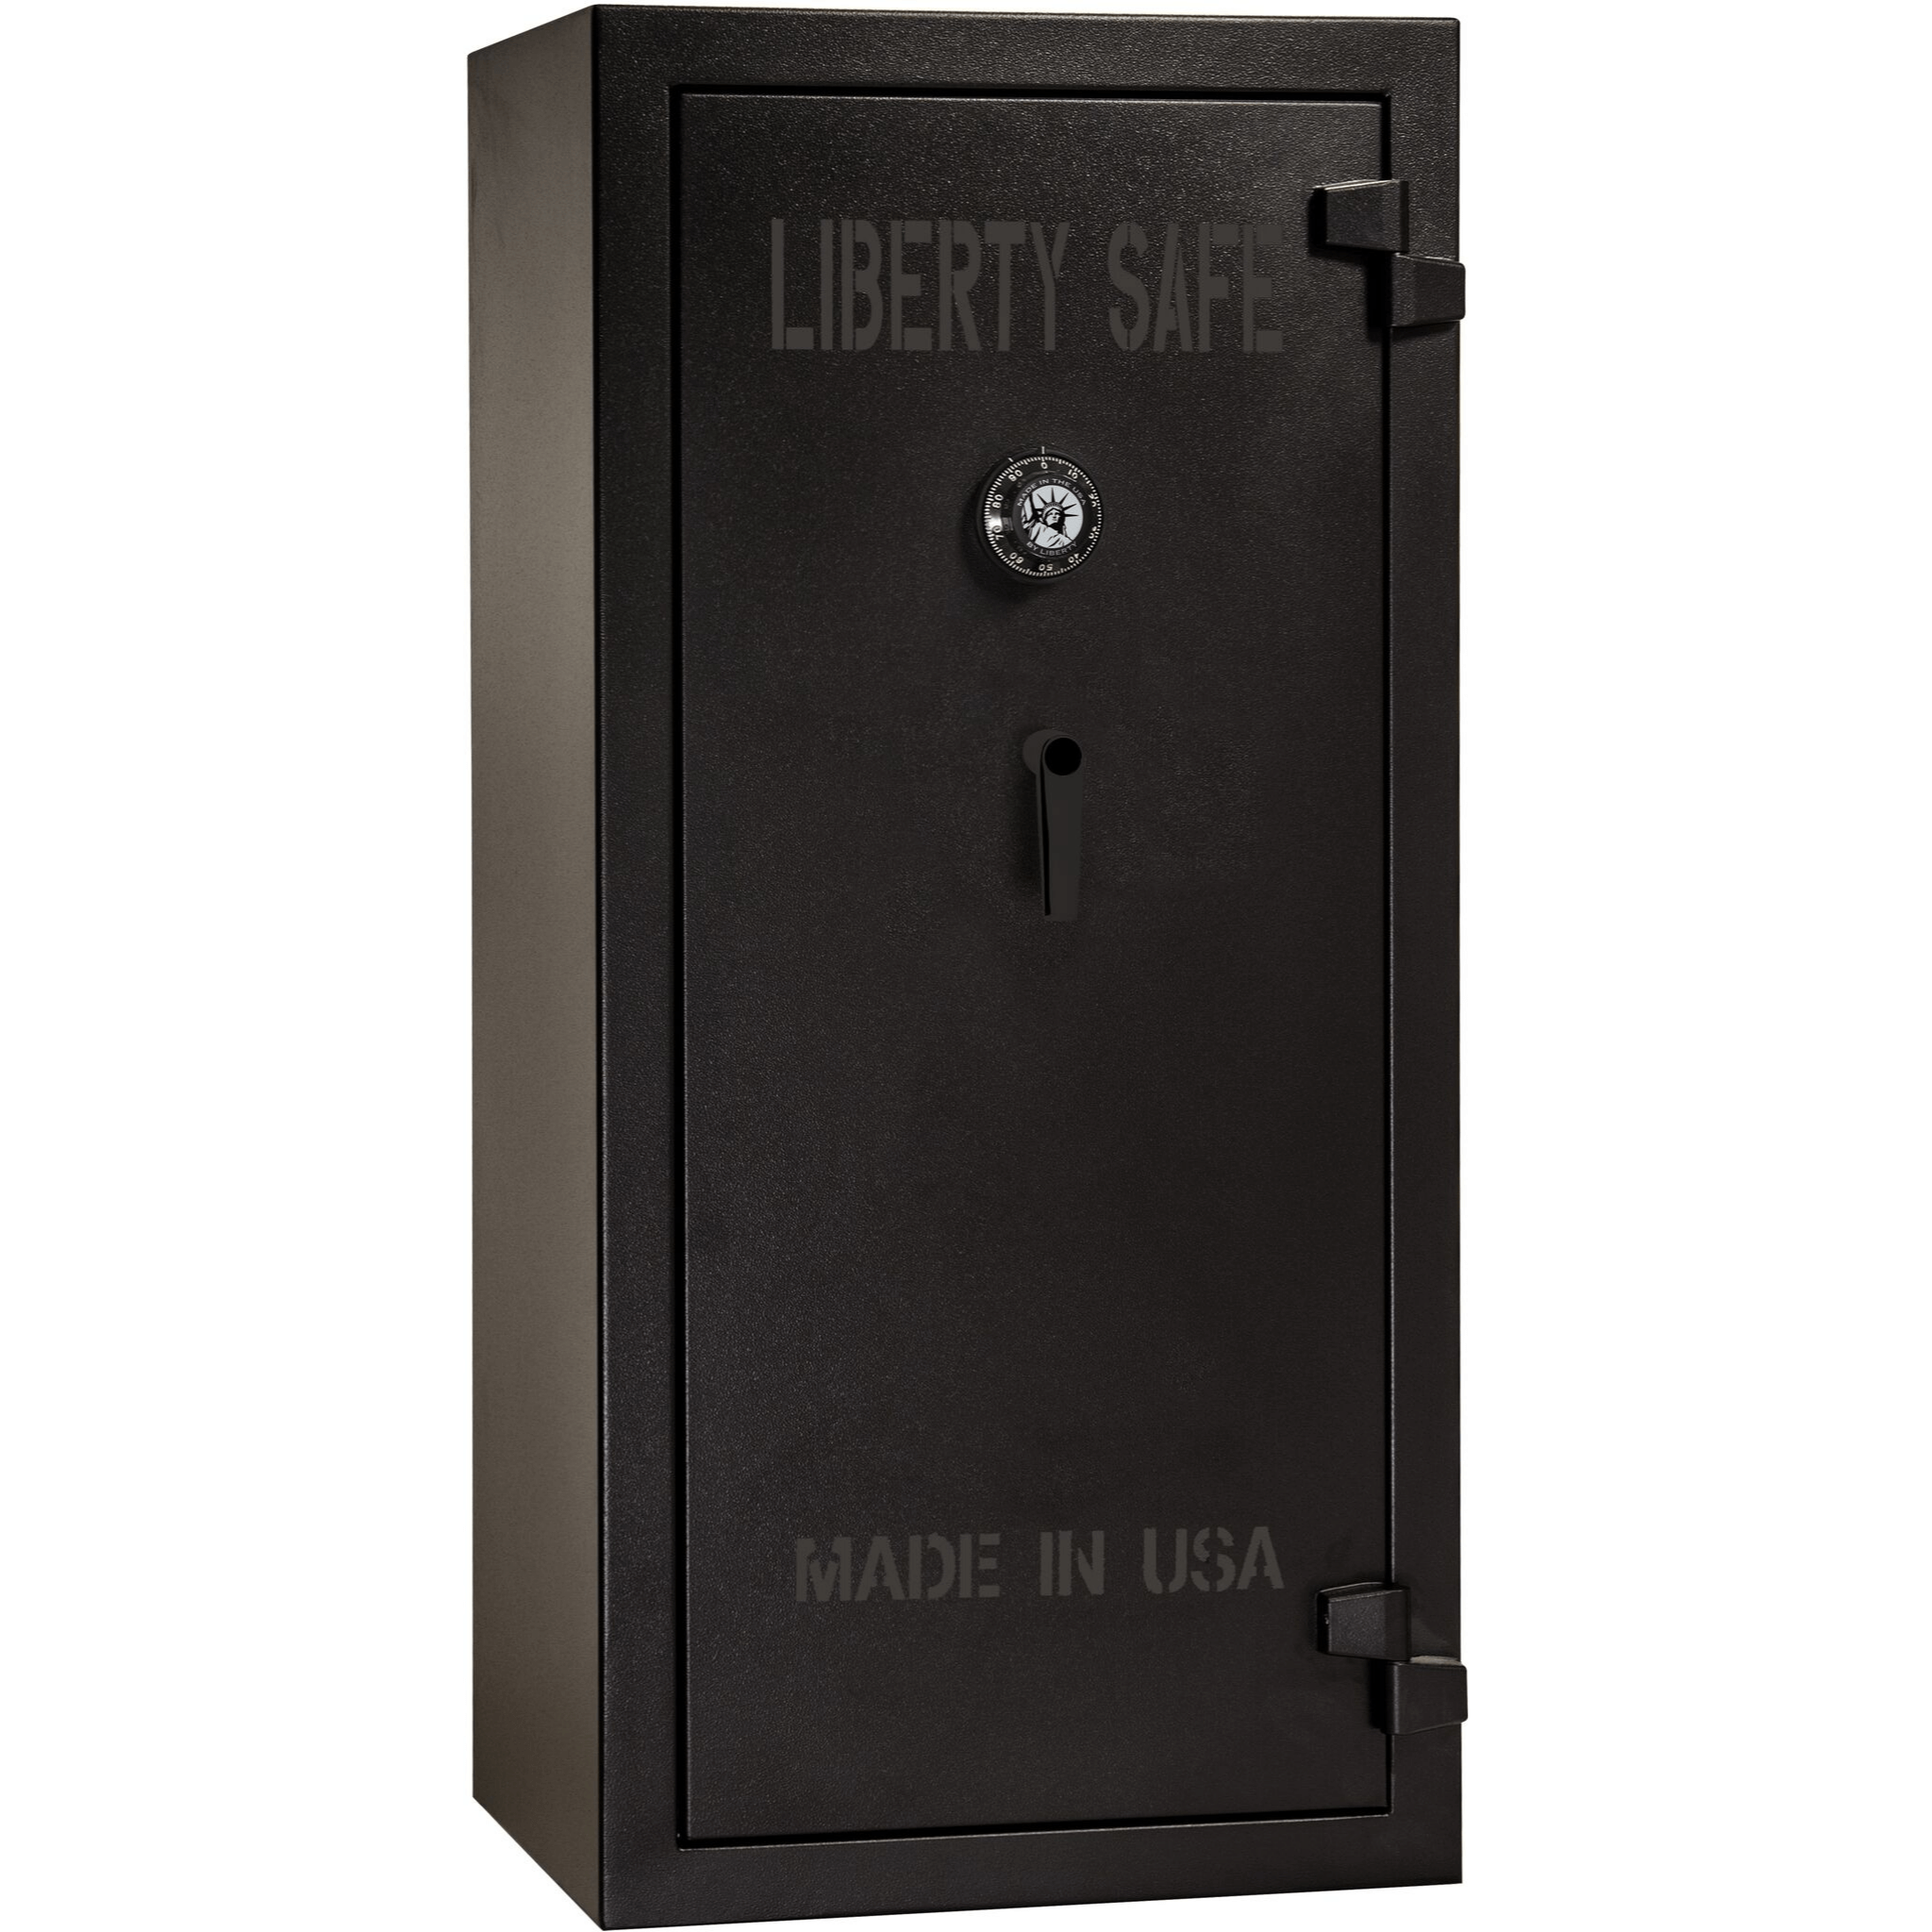 Tactical | 24 | 30 Minute Fire Protection | Black | Black Mechanical Lock | 59.5"(H) x 28.25"(W) x 22"(D), photo 1